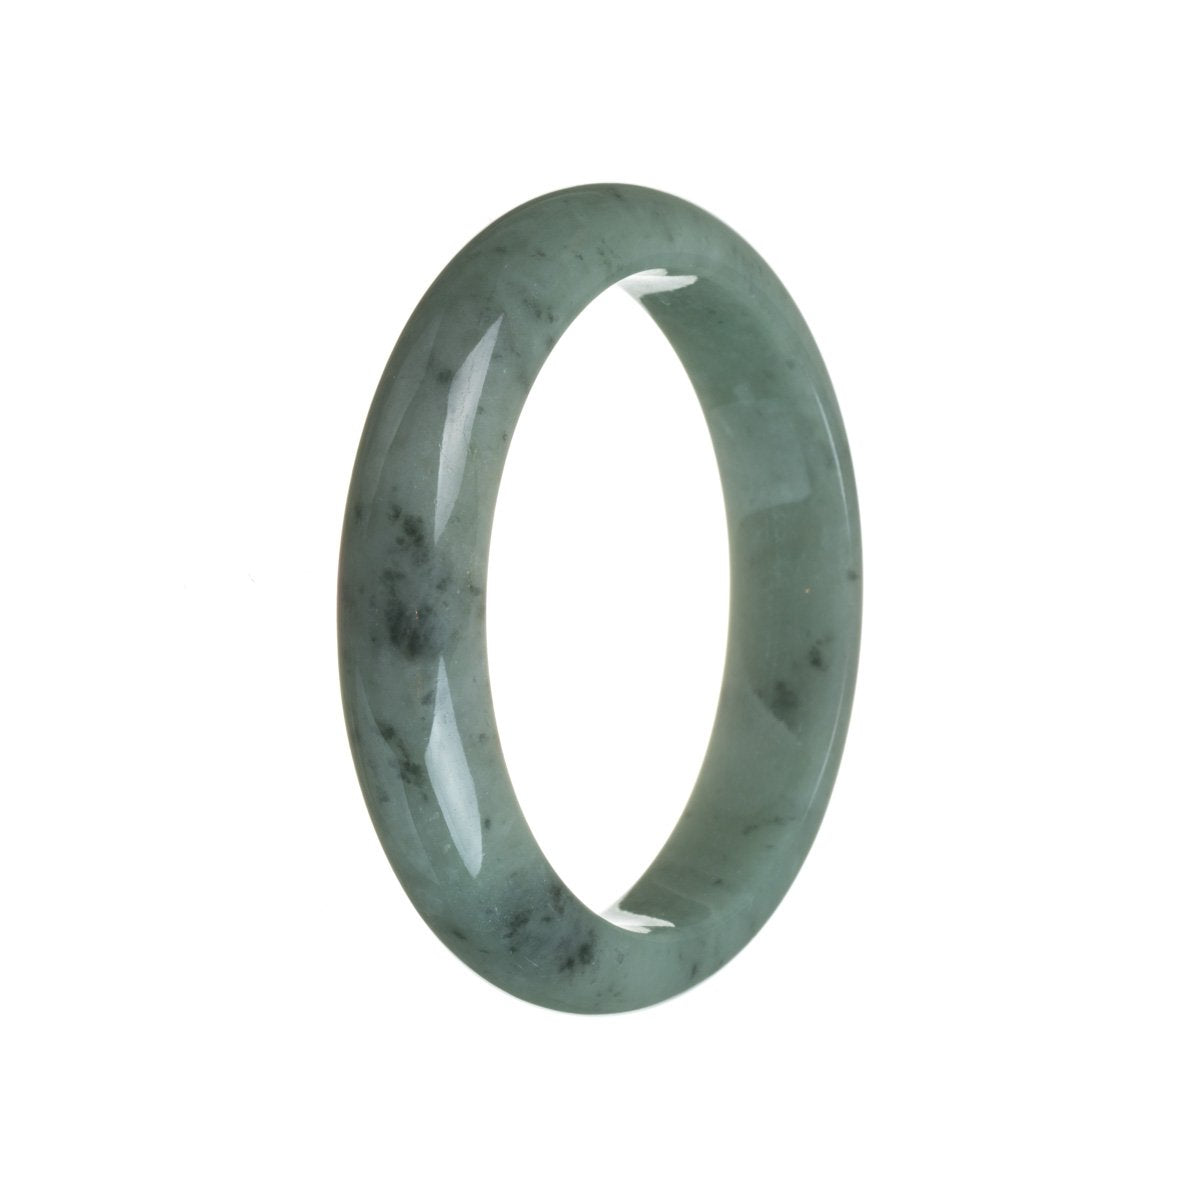 A close-up image of a grey jadeite bangle bracelet with a semi-round shape. The bracelet is made of authentic Grade A grey jadeite and measures 59mm in diameter. It is a beautiful piece of jewelry from Mays Gems.